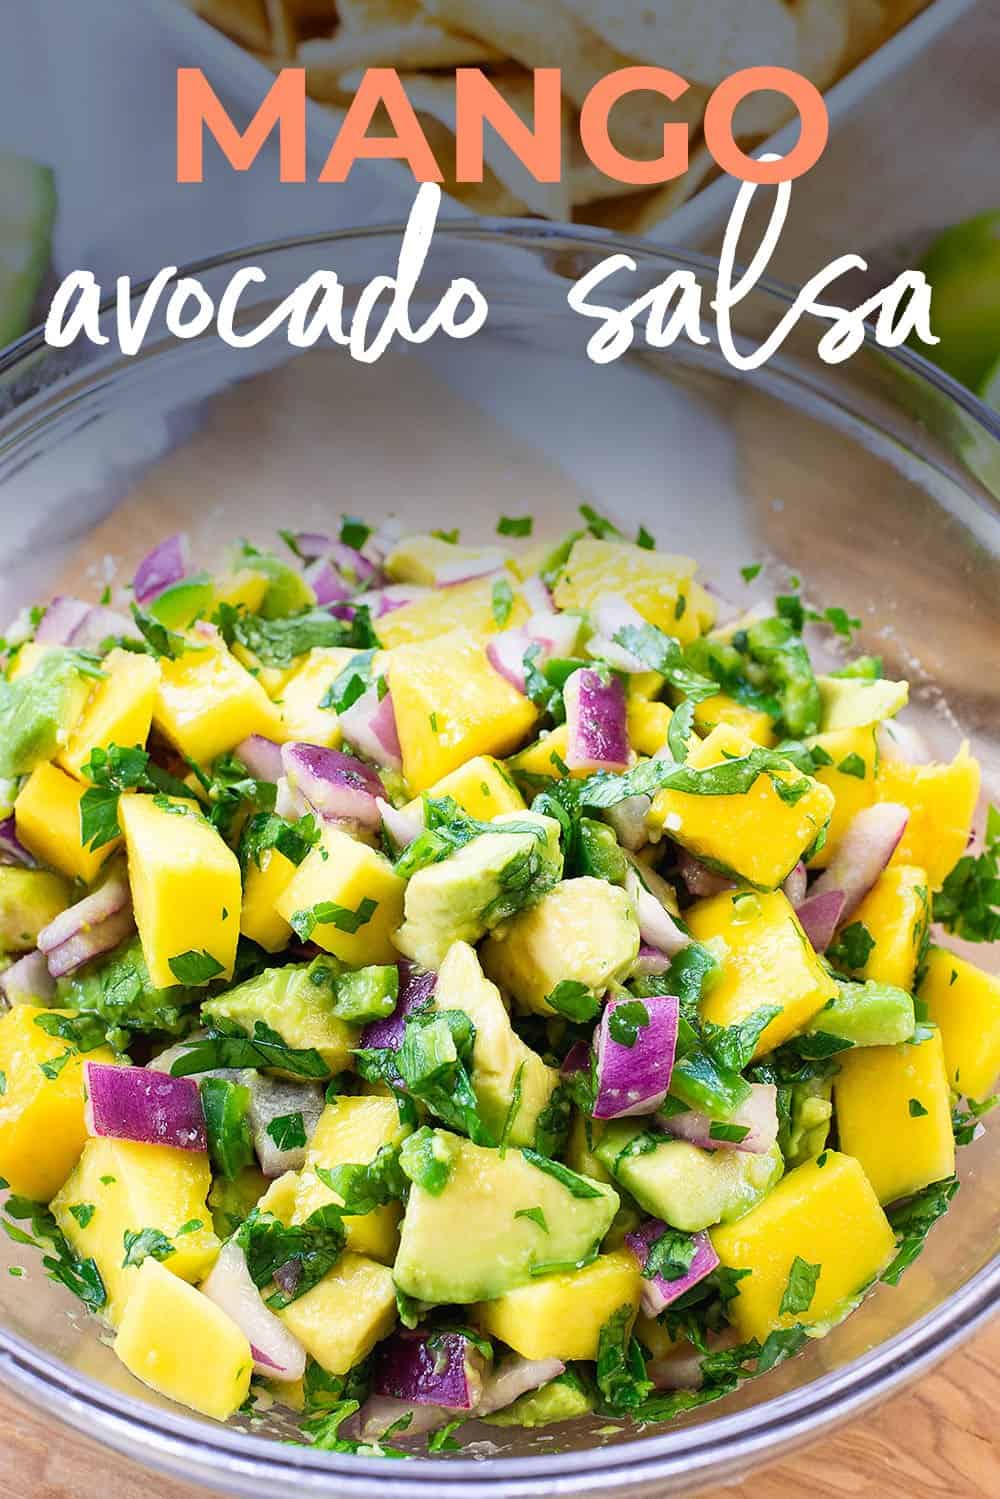 salsa with avocado and mango in glass bowl.